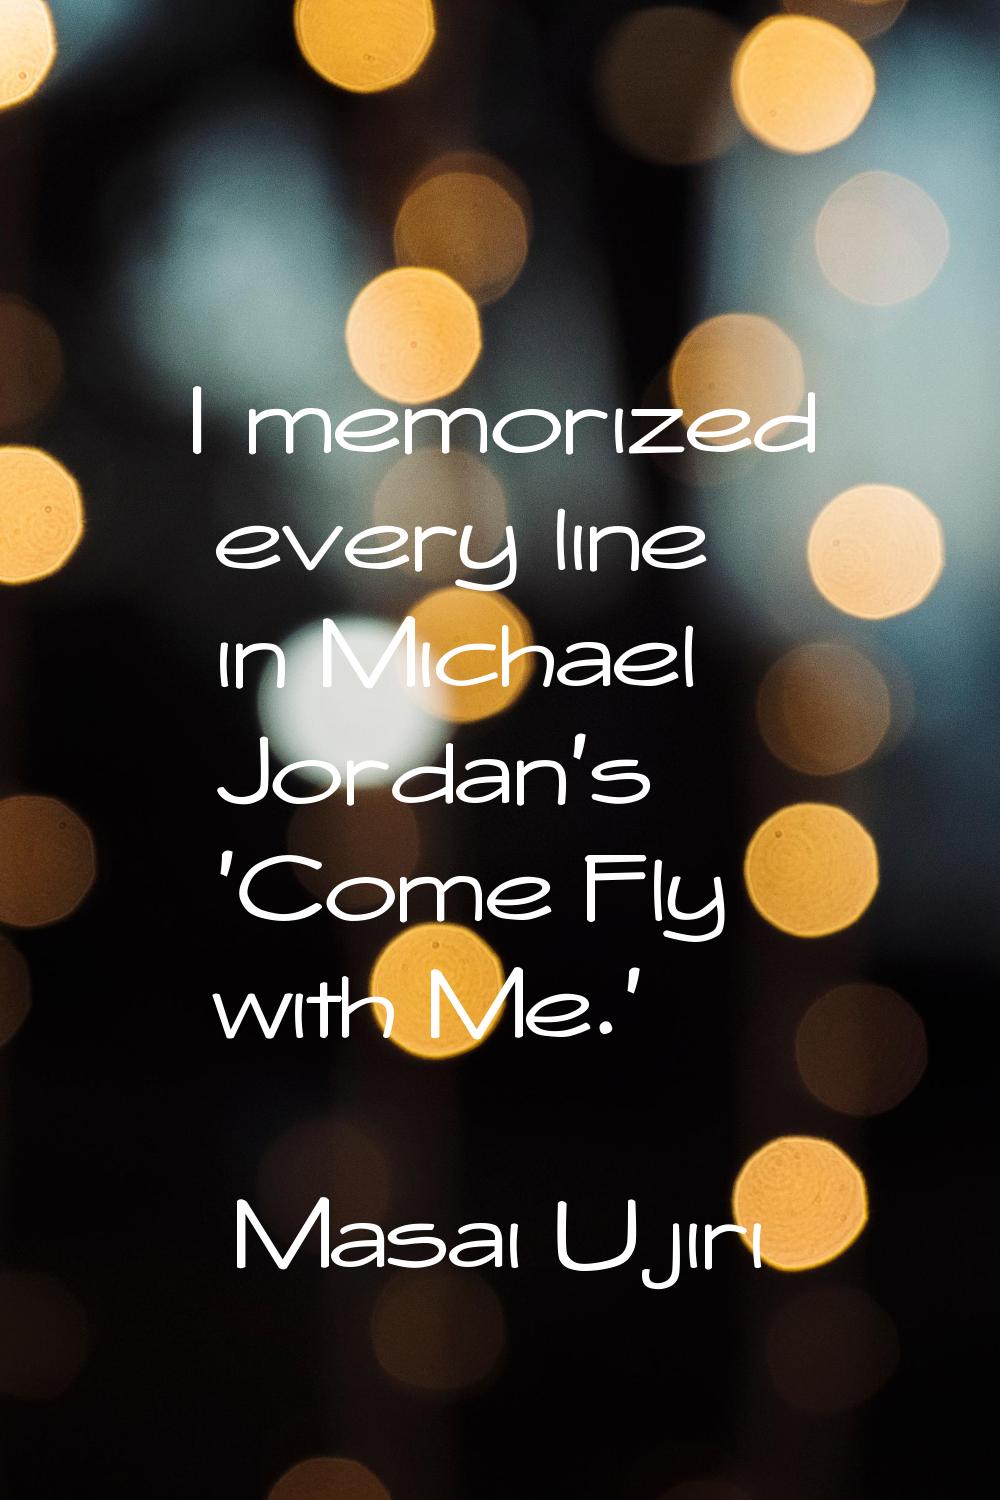 I memorized every line in Michael Jordan's 'Come Fly with Me.'